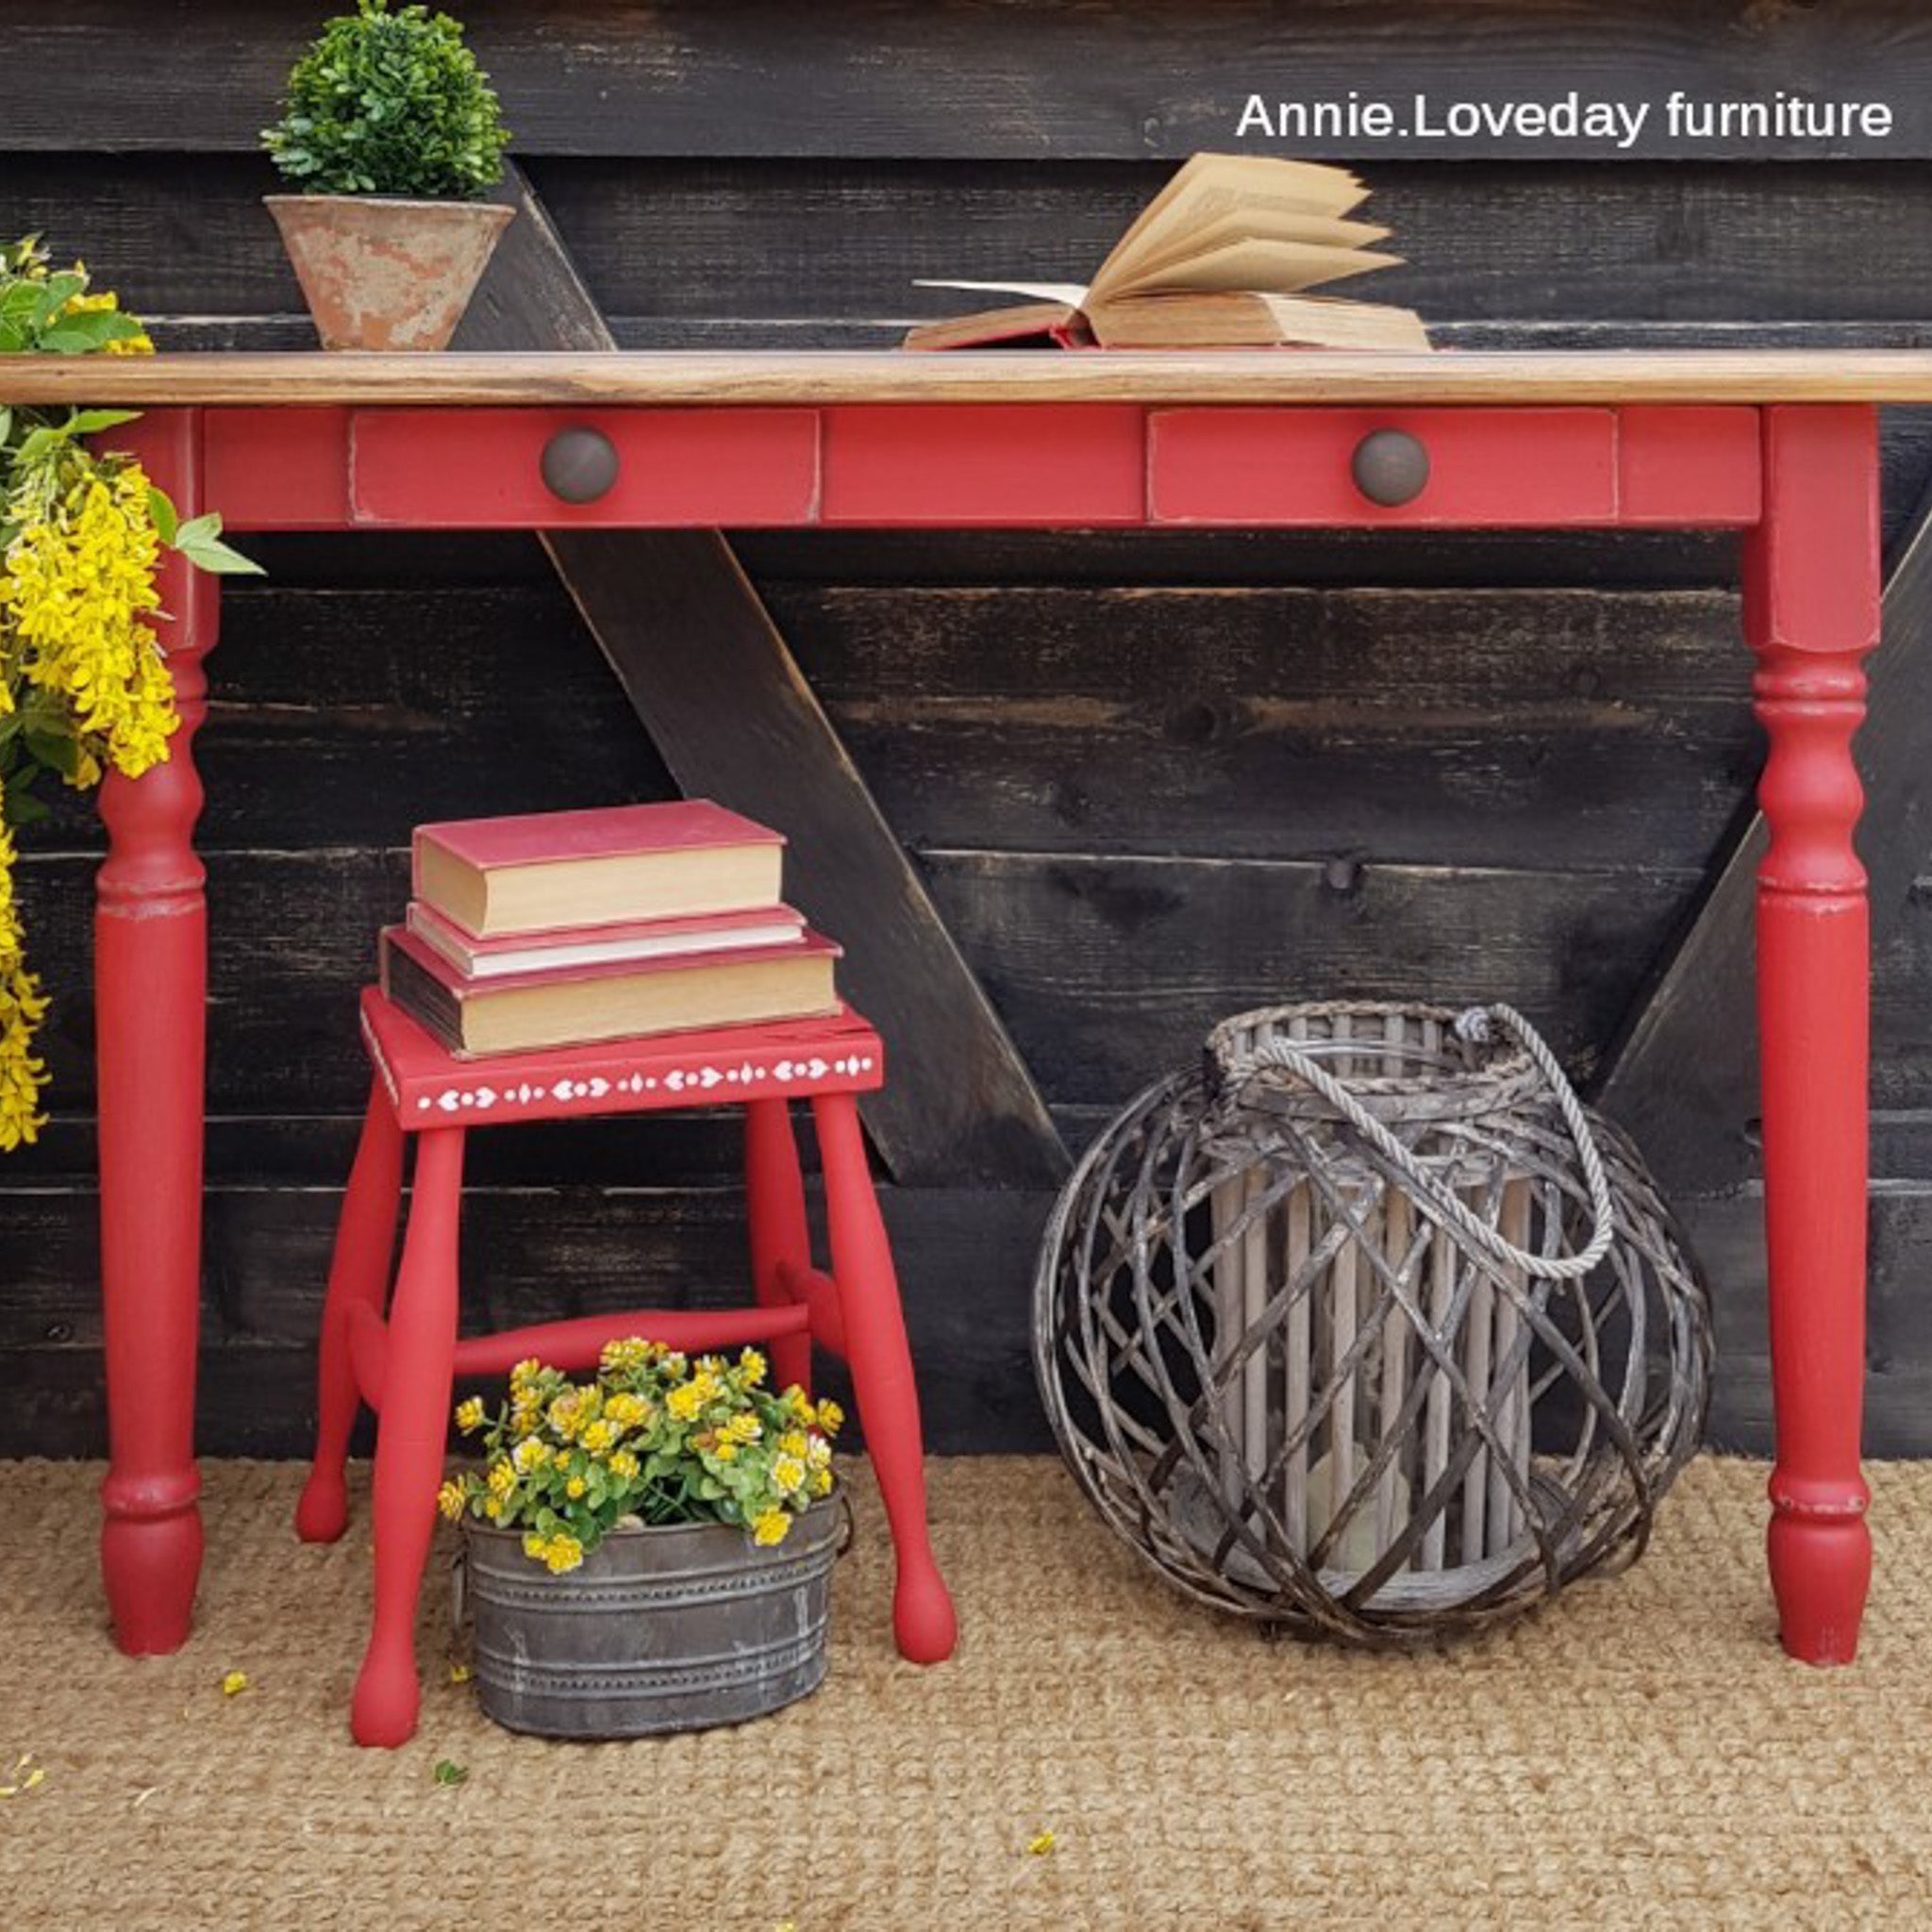 A vintage kids desk and stool refurbished by Annie Loveday Furniture are painted in Dixie Belle's Honky Tonk Red chalk mineral paint.